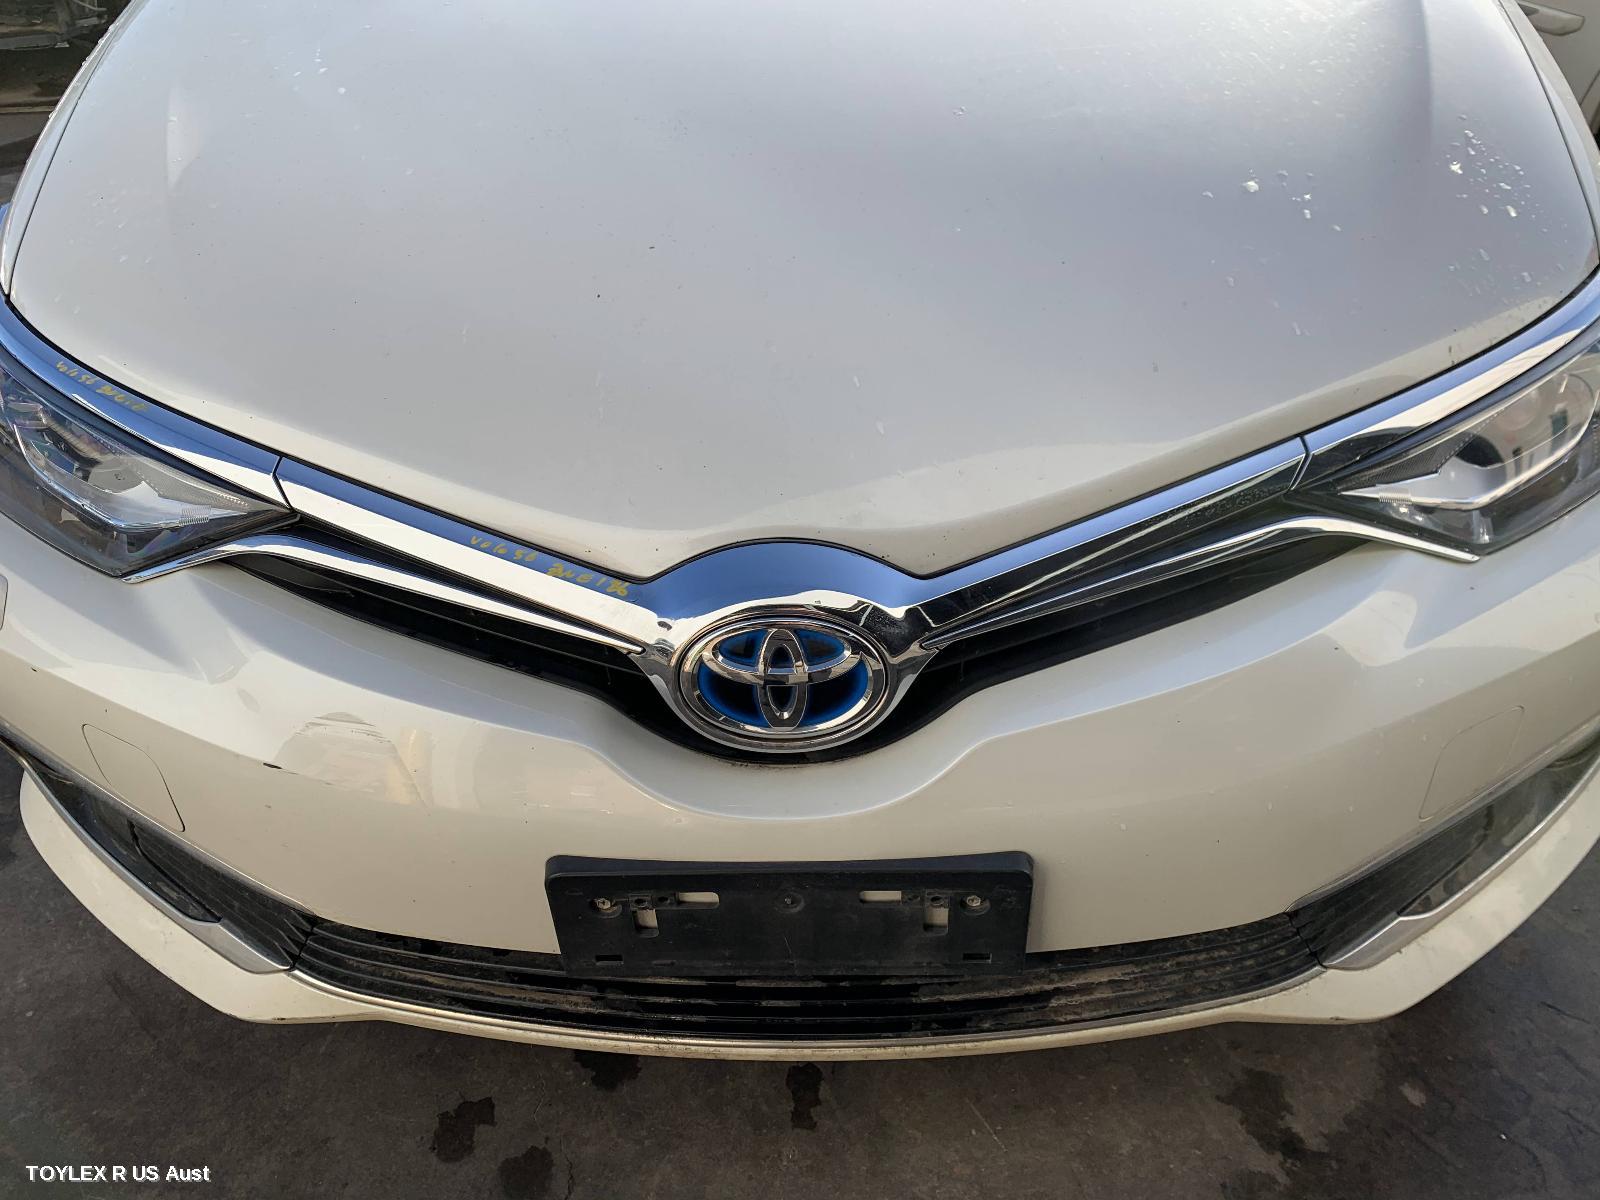 TOYOTA COROLLA, Grille, RADIATOR GRILLE, ZRE182R/ZWE186R, ASCENT/ASCENT SPORT/HYBRID, 03/15-06/18